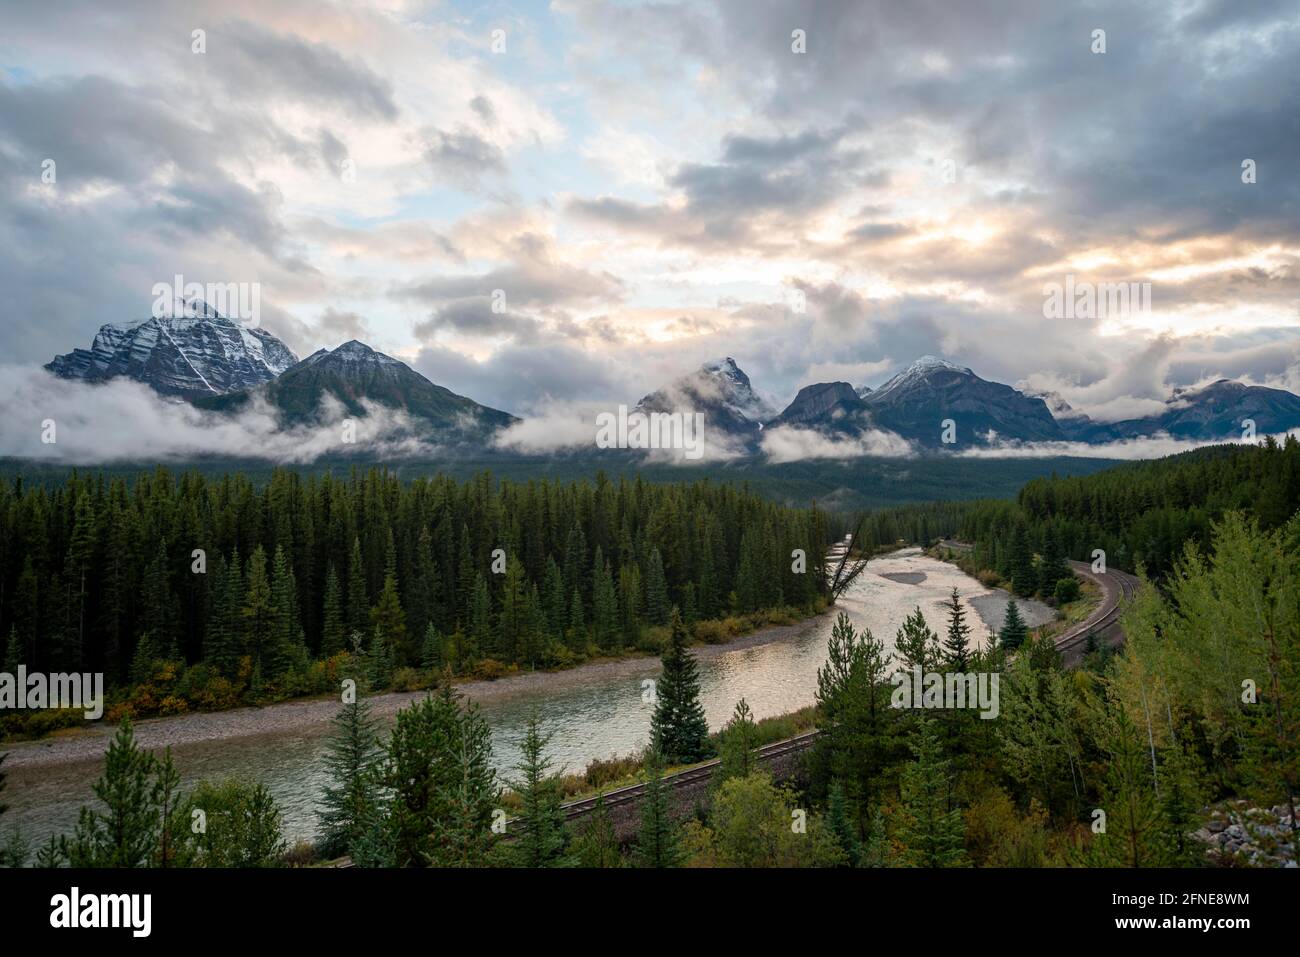 Cloudy Rocky Mountains at sunset, Morant's Curve, forested shore at Bow River, Bow Valley, Banff National Park, Alberta, Canada Stock Photo